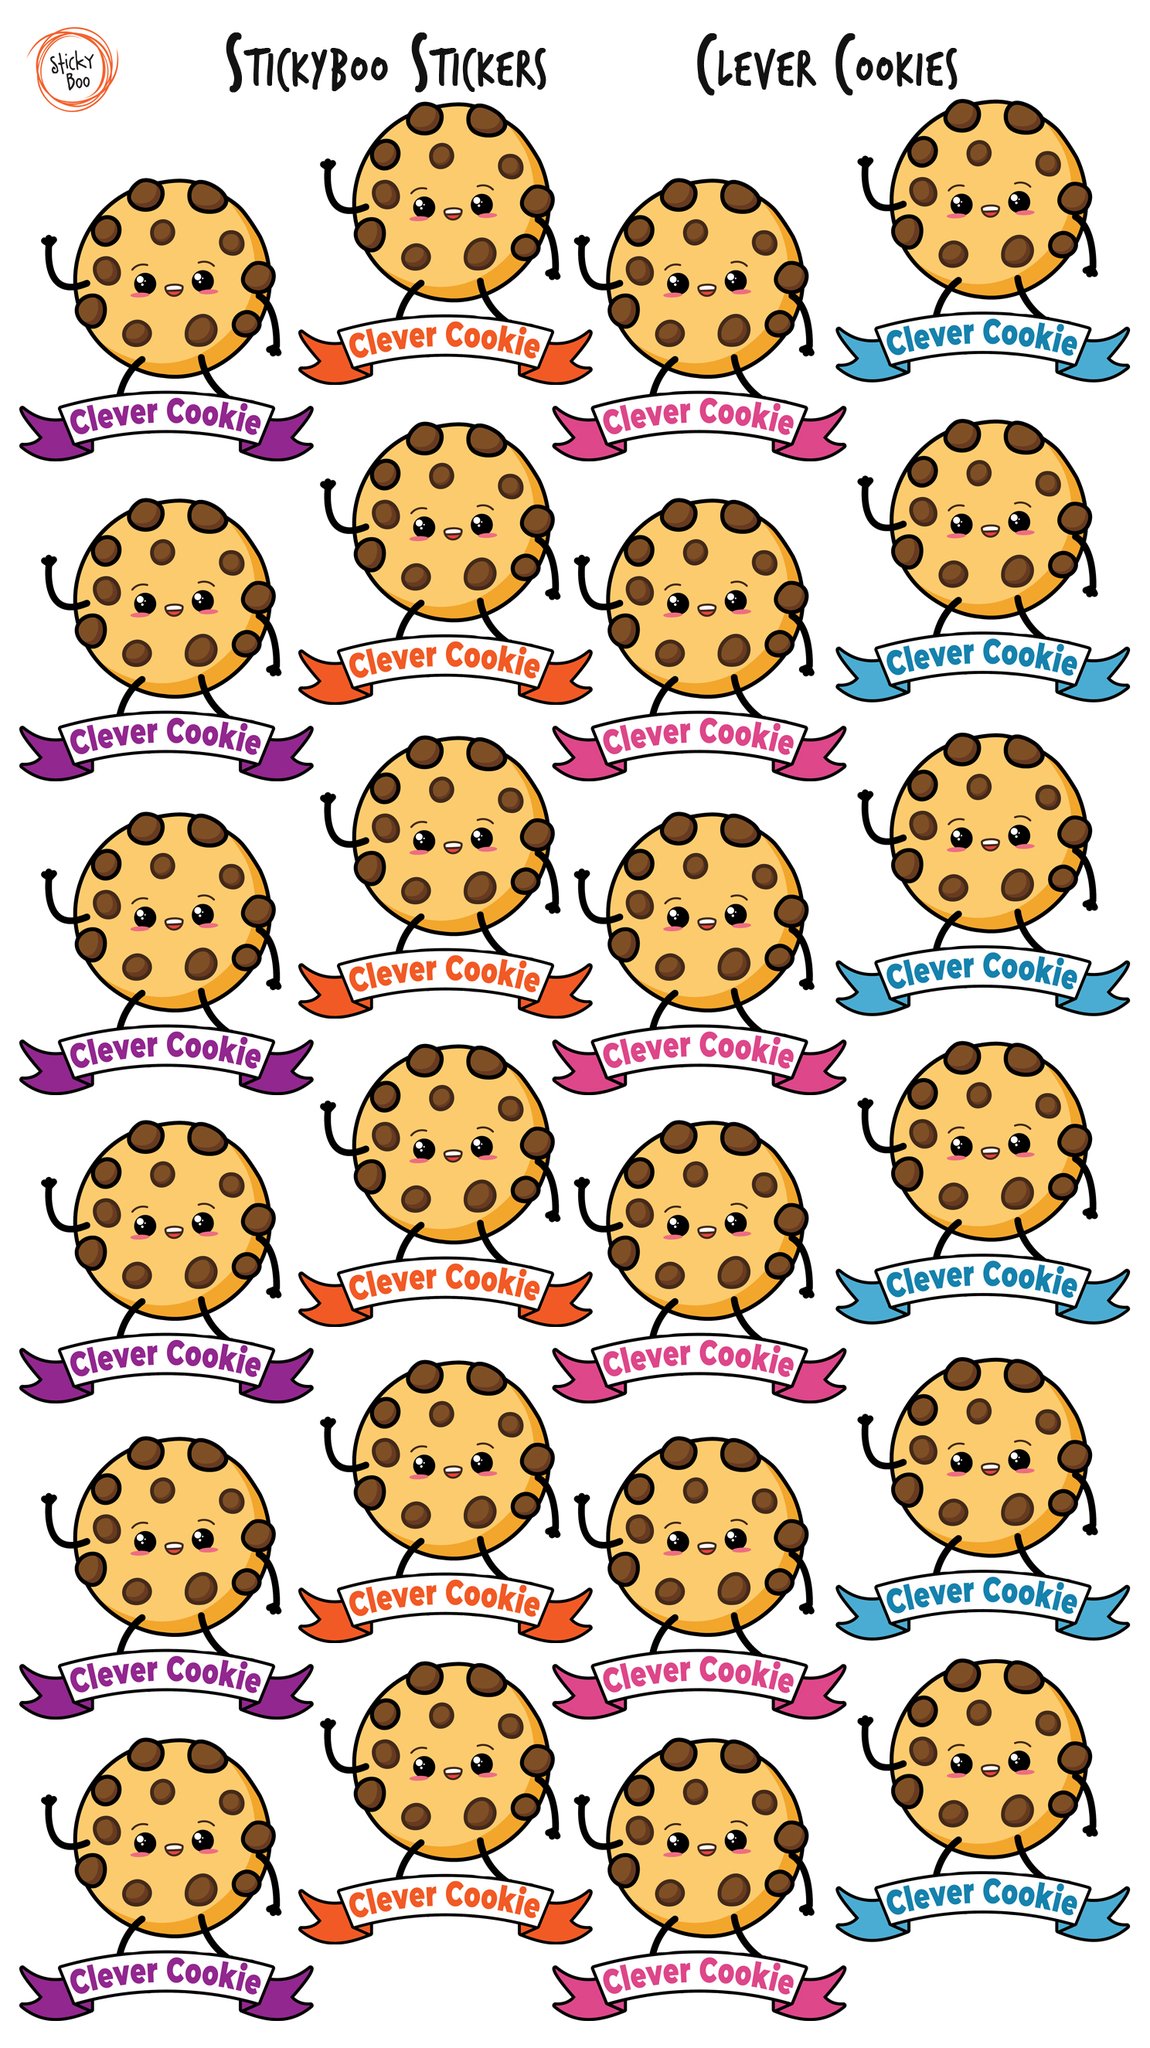 Sticky Boo Reward Stickers - Clever Cookie